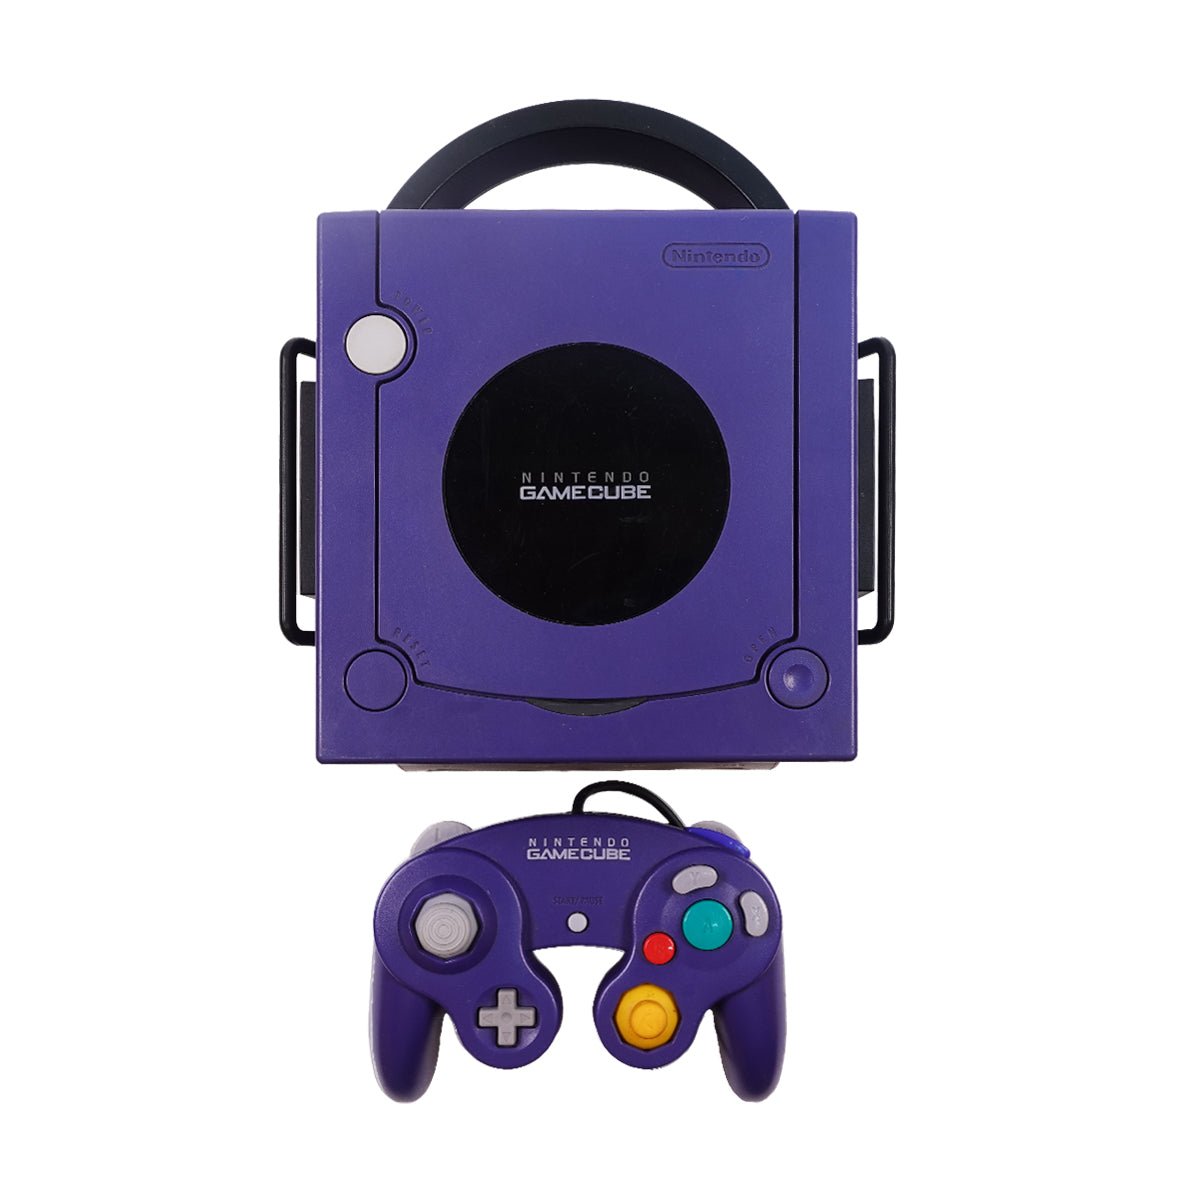 (Pre-Owned) Nintendo GameCube GC Game Console With Controller - Blue - ريترو - Store 974 | ستور ٩٧٤